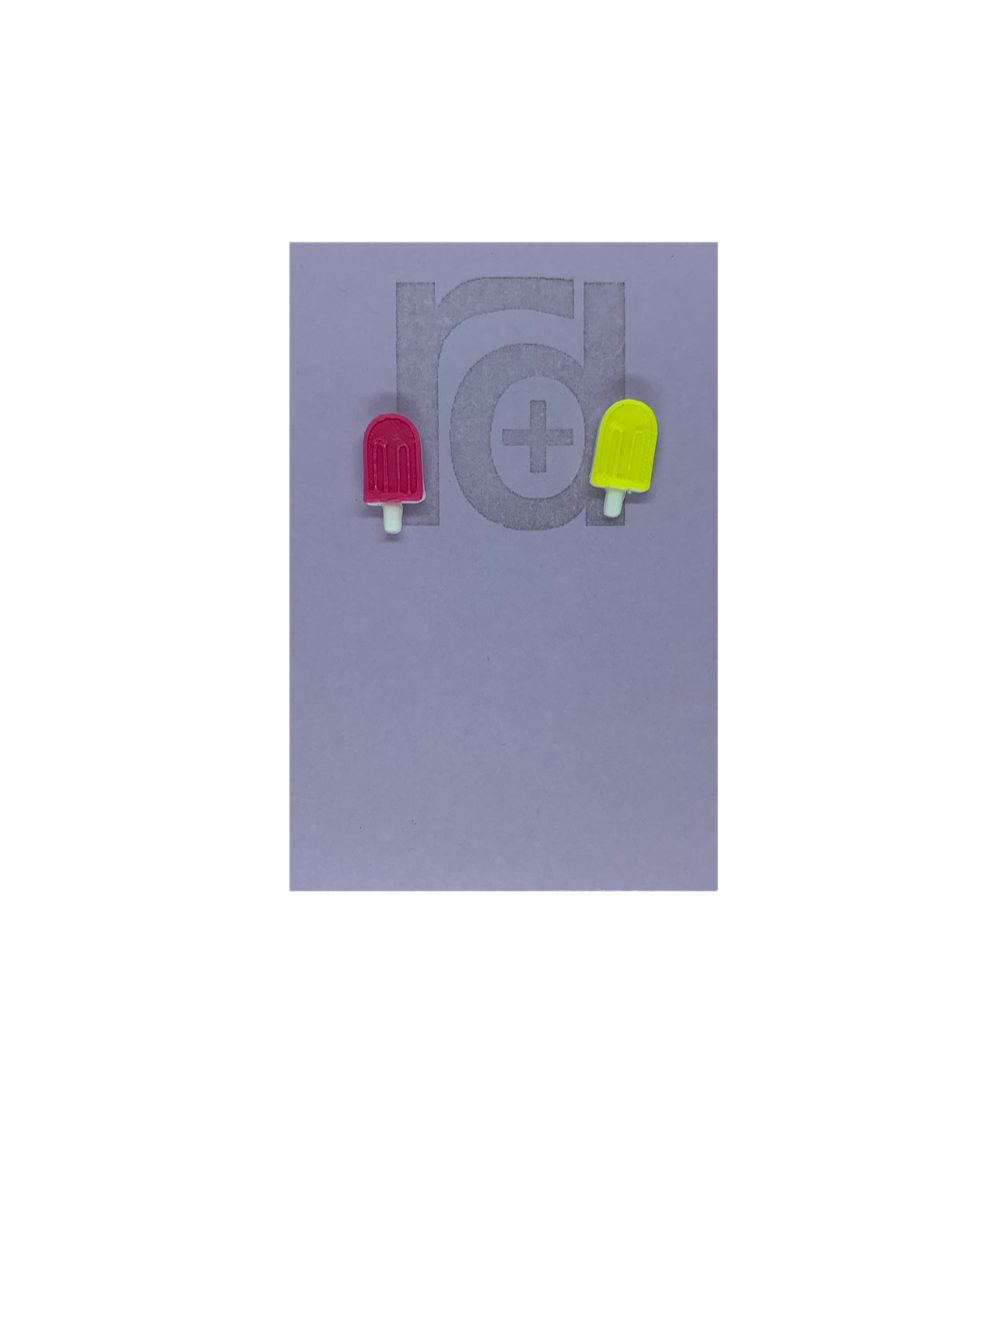 Two small and detailed R+D earrings are shown on a purple earring card. They are shaped as popsicles with white sticks. The earrings are mismatched, one popsicle is hot pink and one is bright yellow.